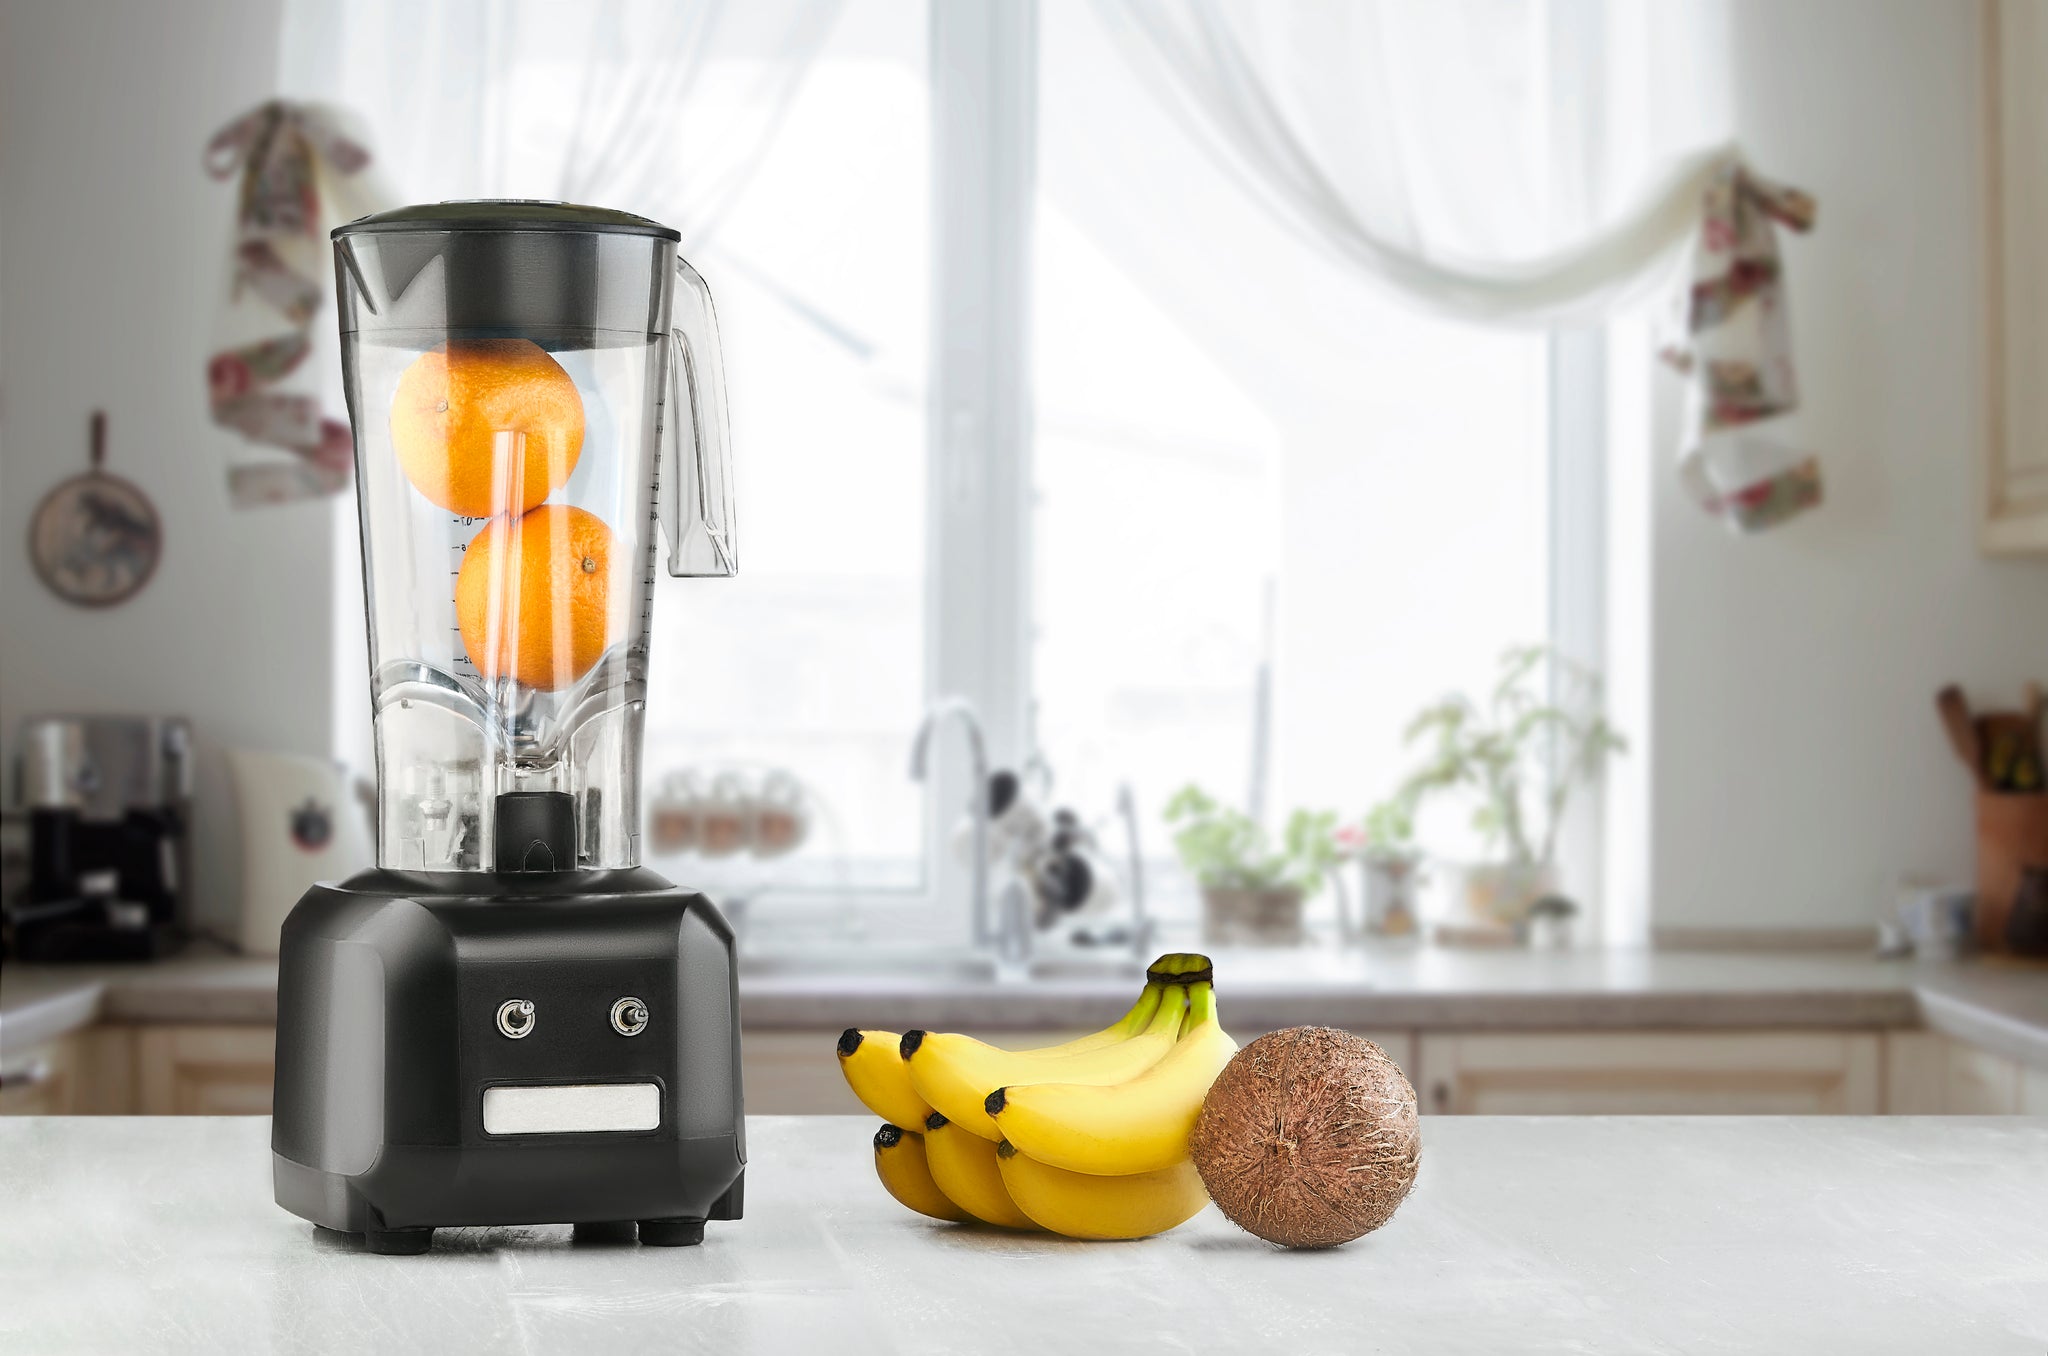 Metal blender with oranges inside and bananas to the side